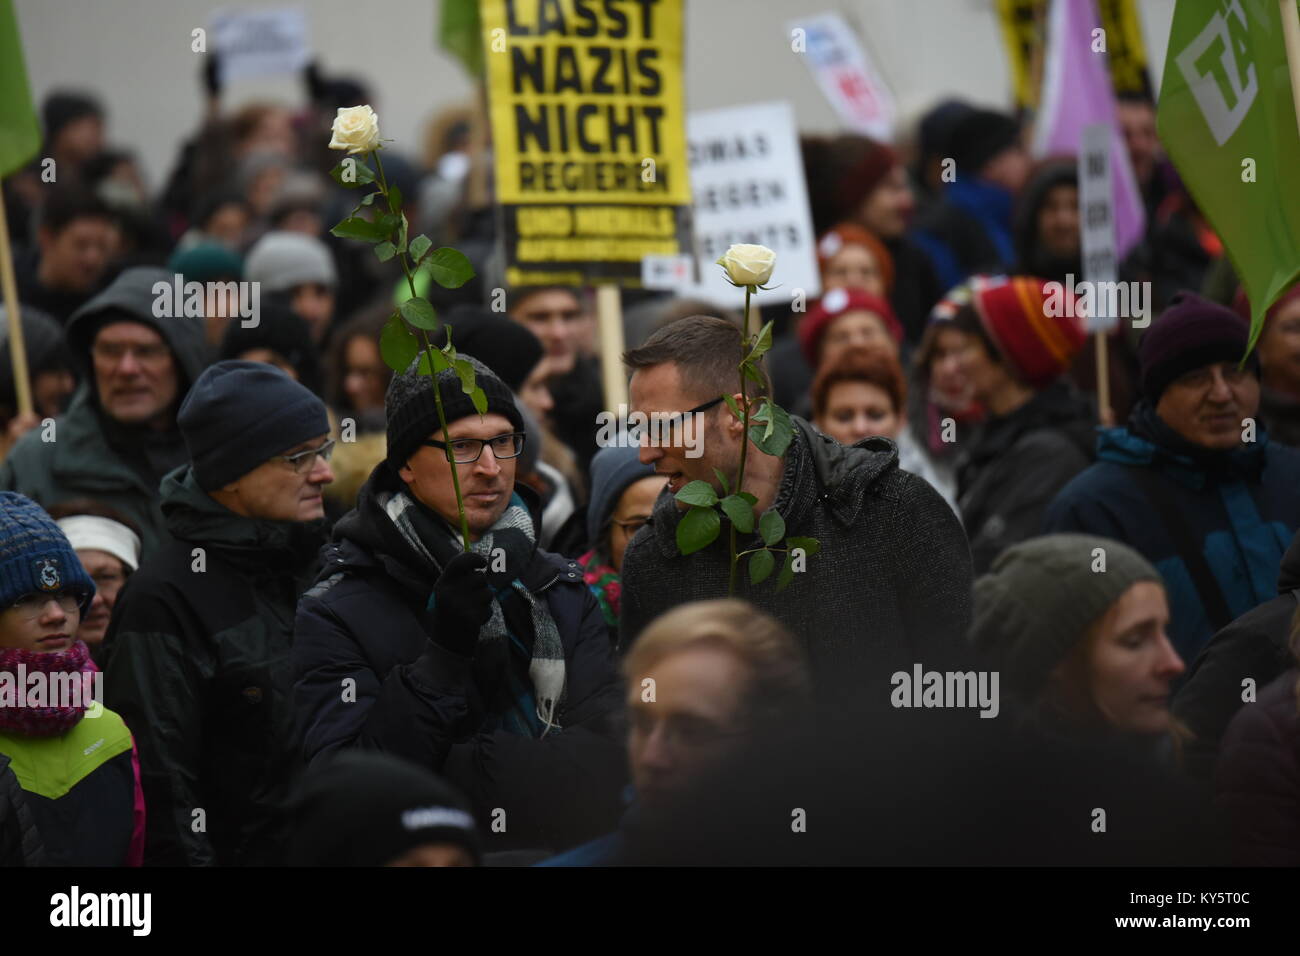 Vienna, Austria. 13th Jan, 2018. protesters holding roses during as anti-government demonstration. Credit: Vincent Sufiyan/Alamy Live News Stock Photo